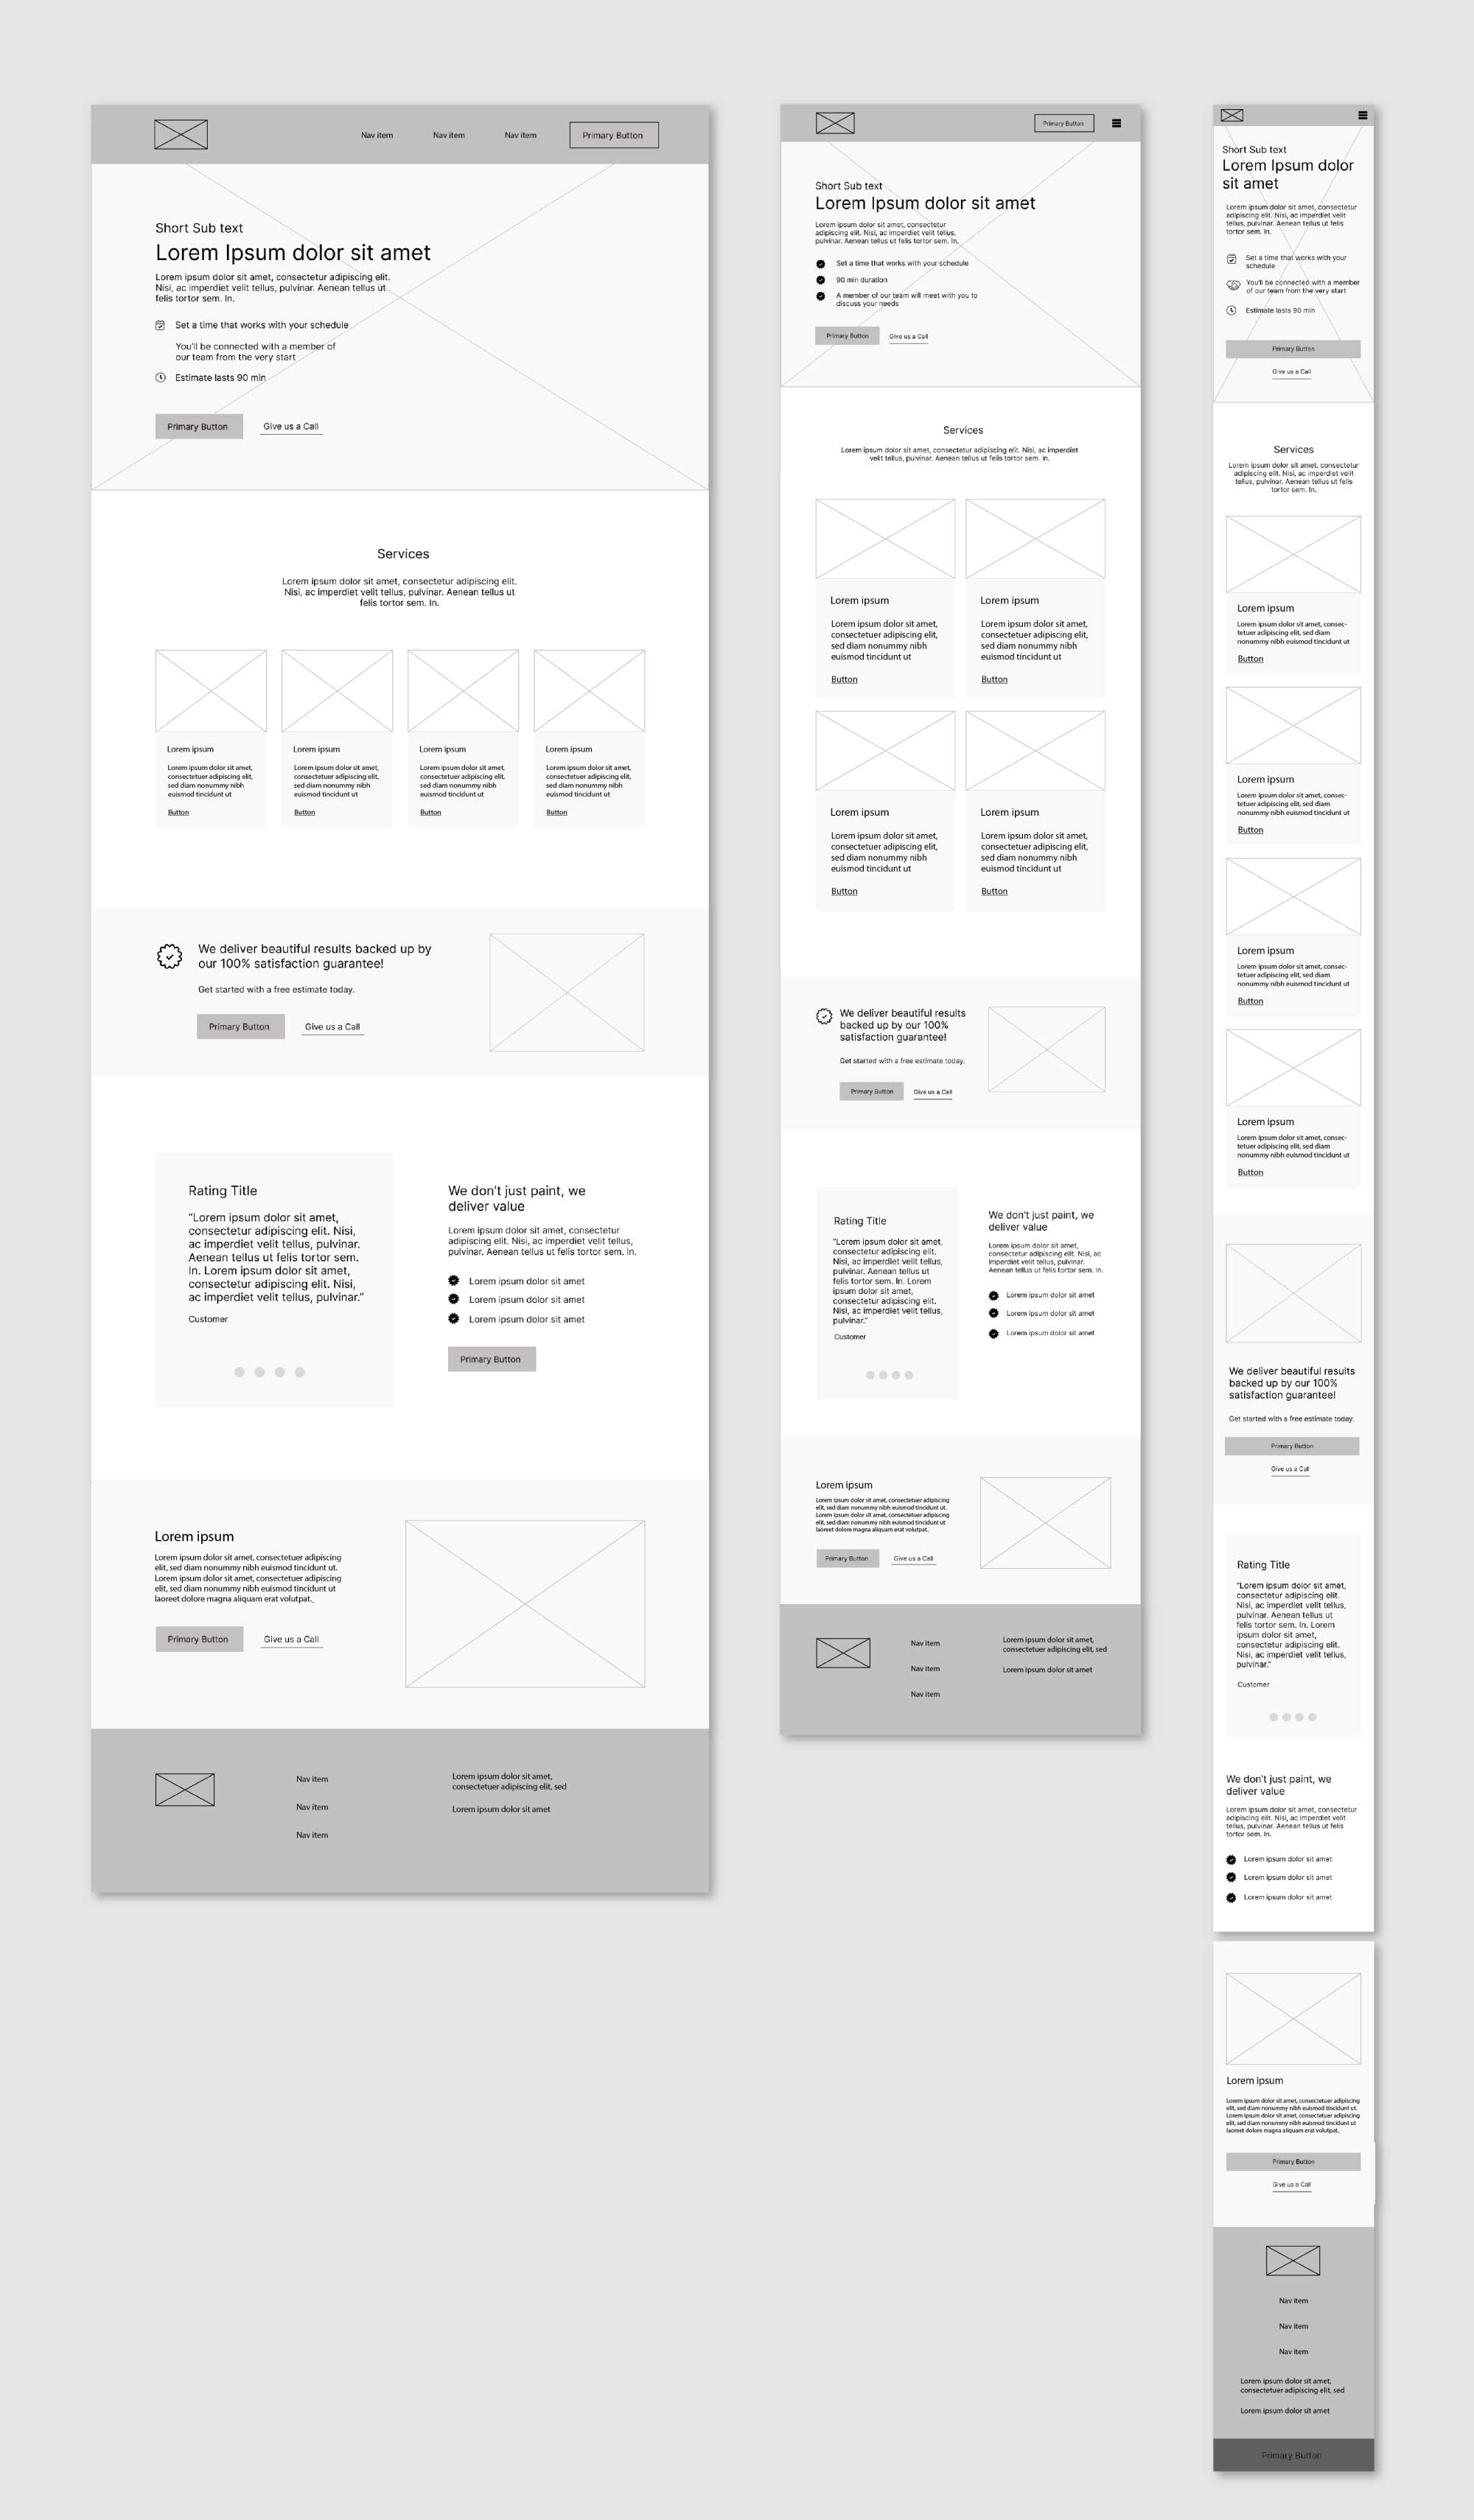 Marketing page wireframes large, medium, and small displays